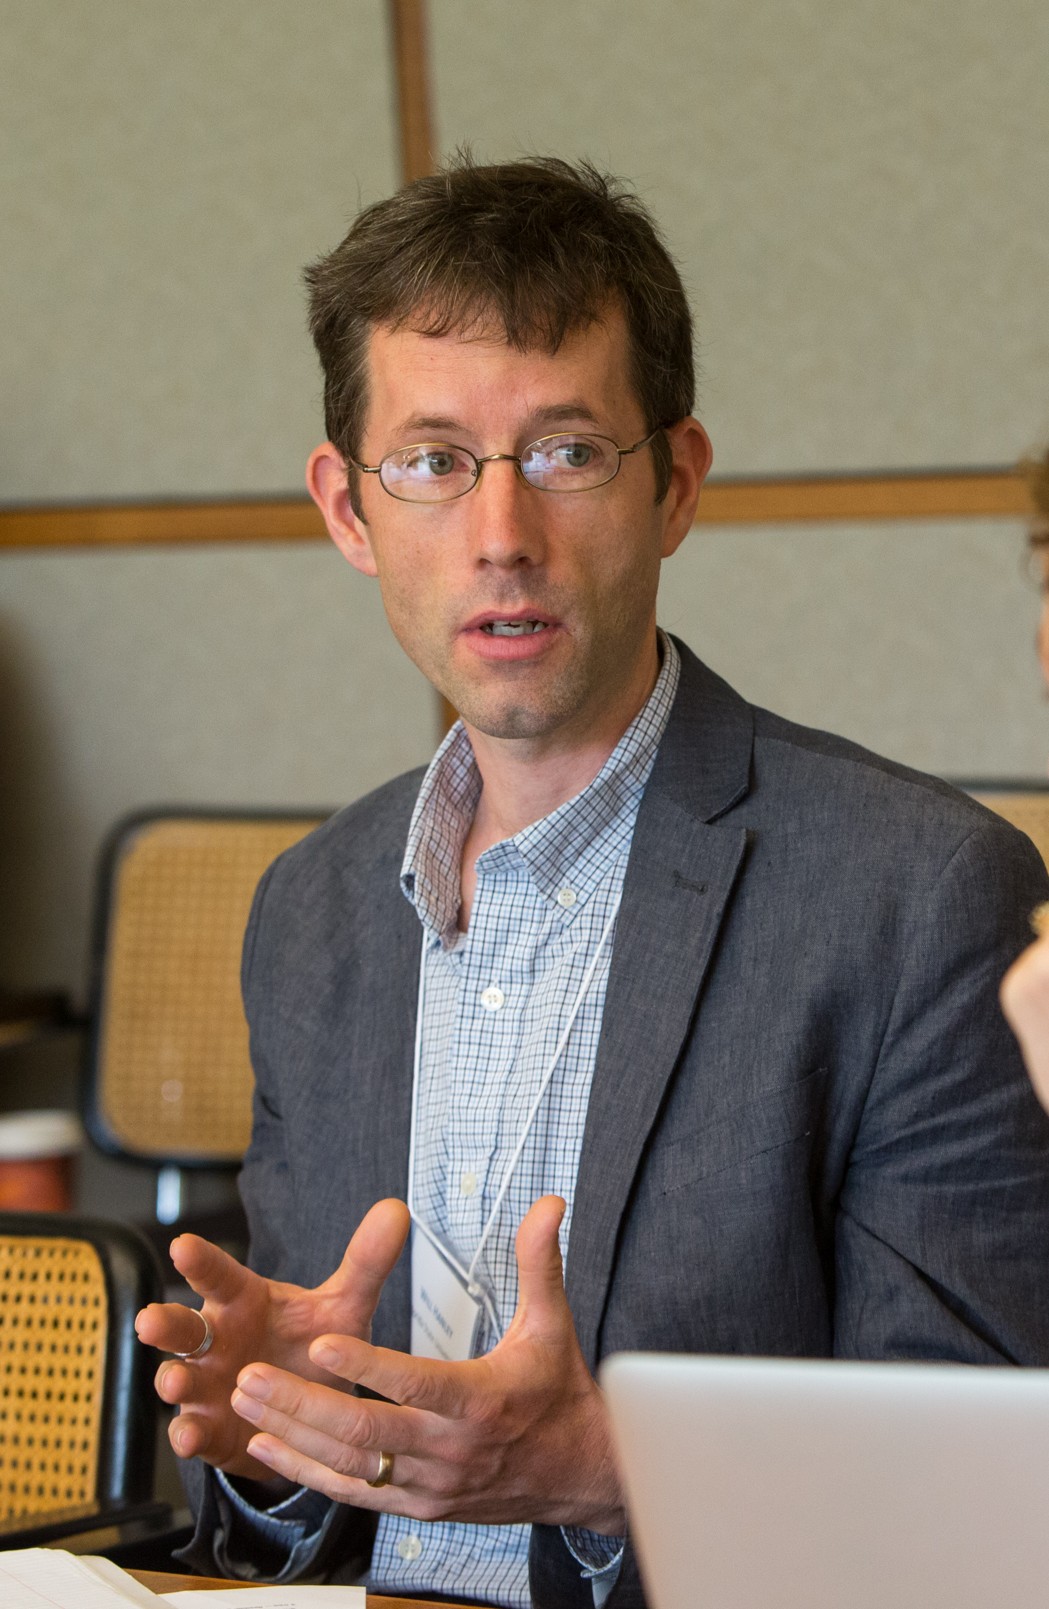 Will Hanley.  (c) Institute for Advanced Study, Princeton 2015 photographer: Andrea Kane